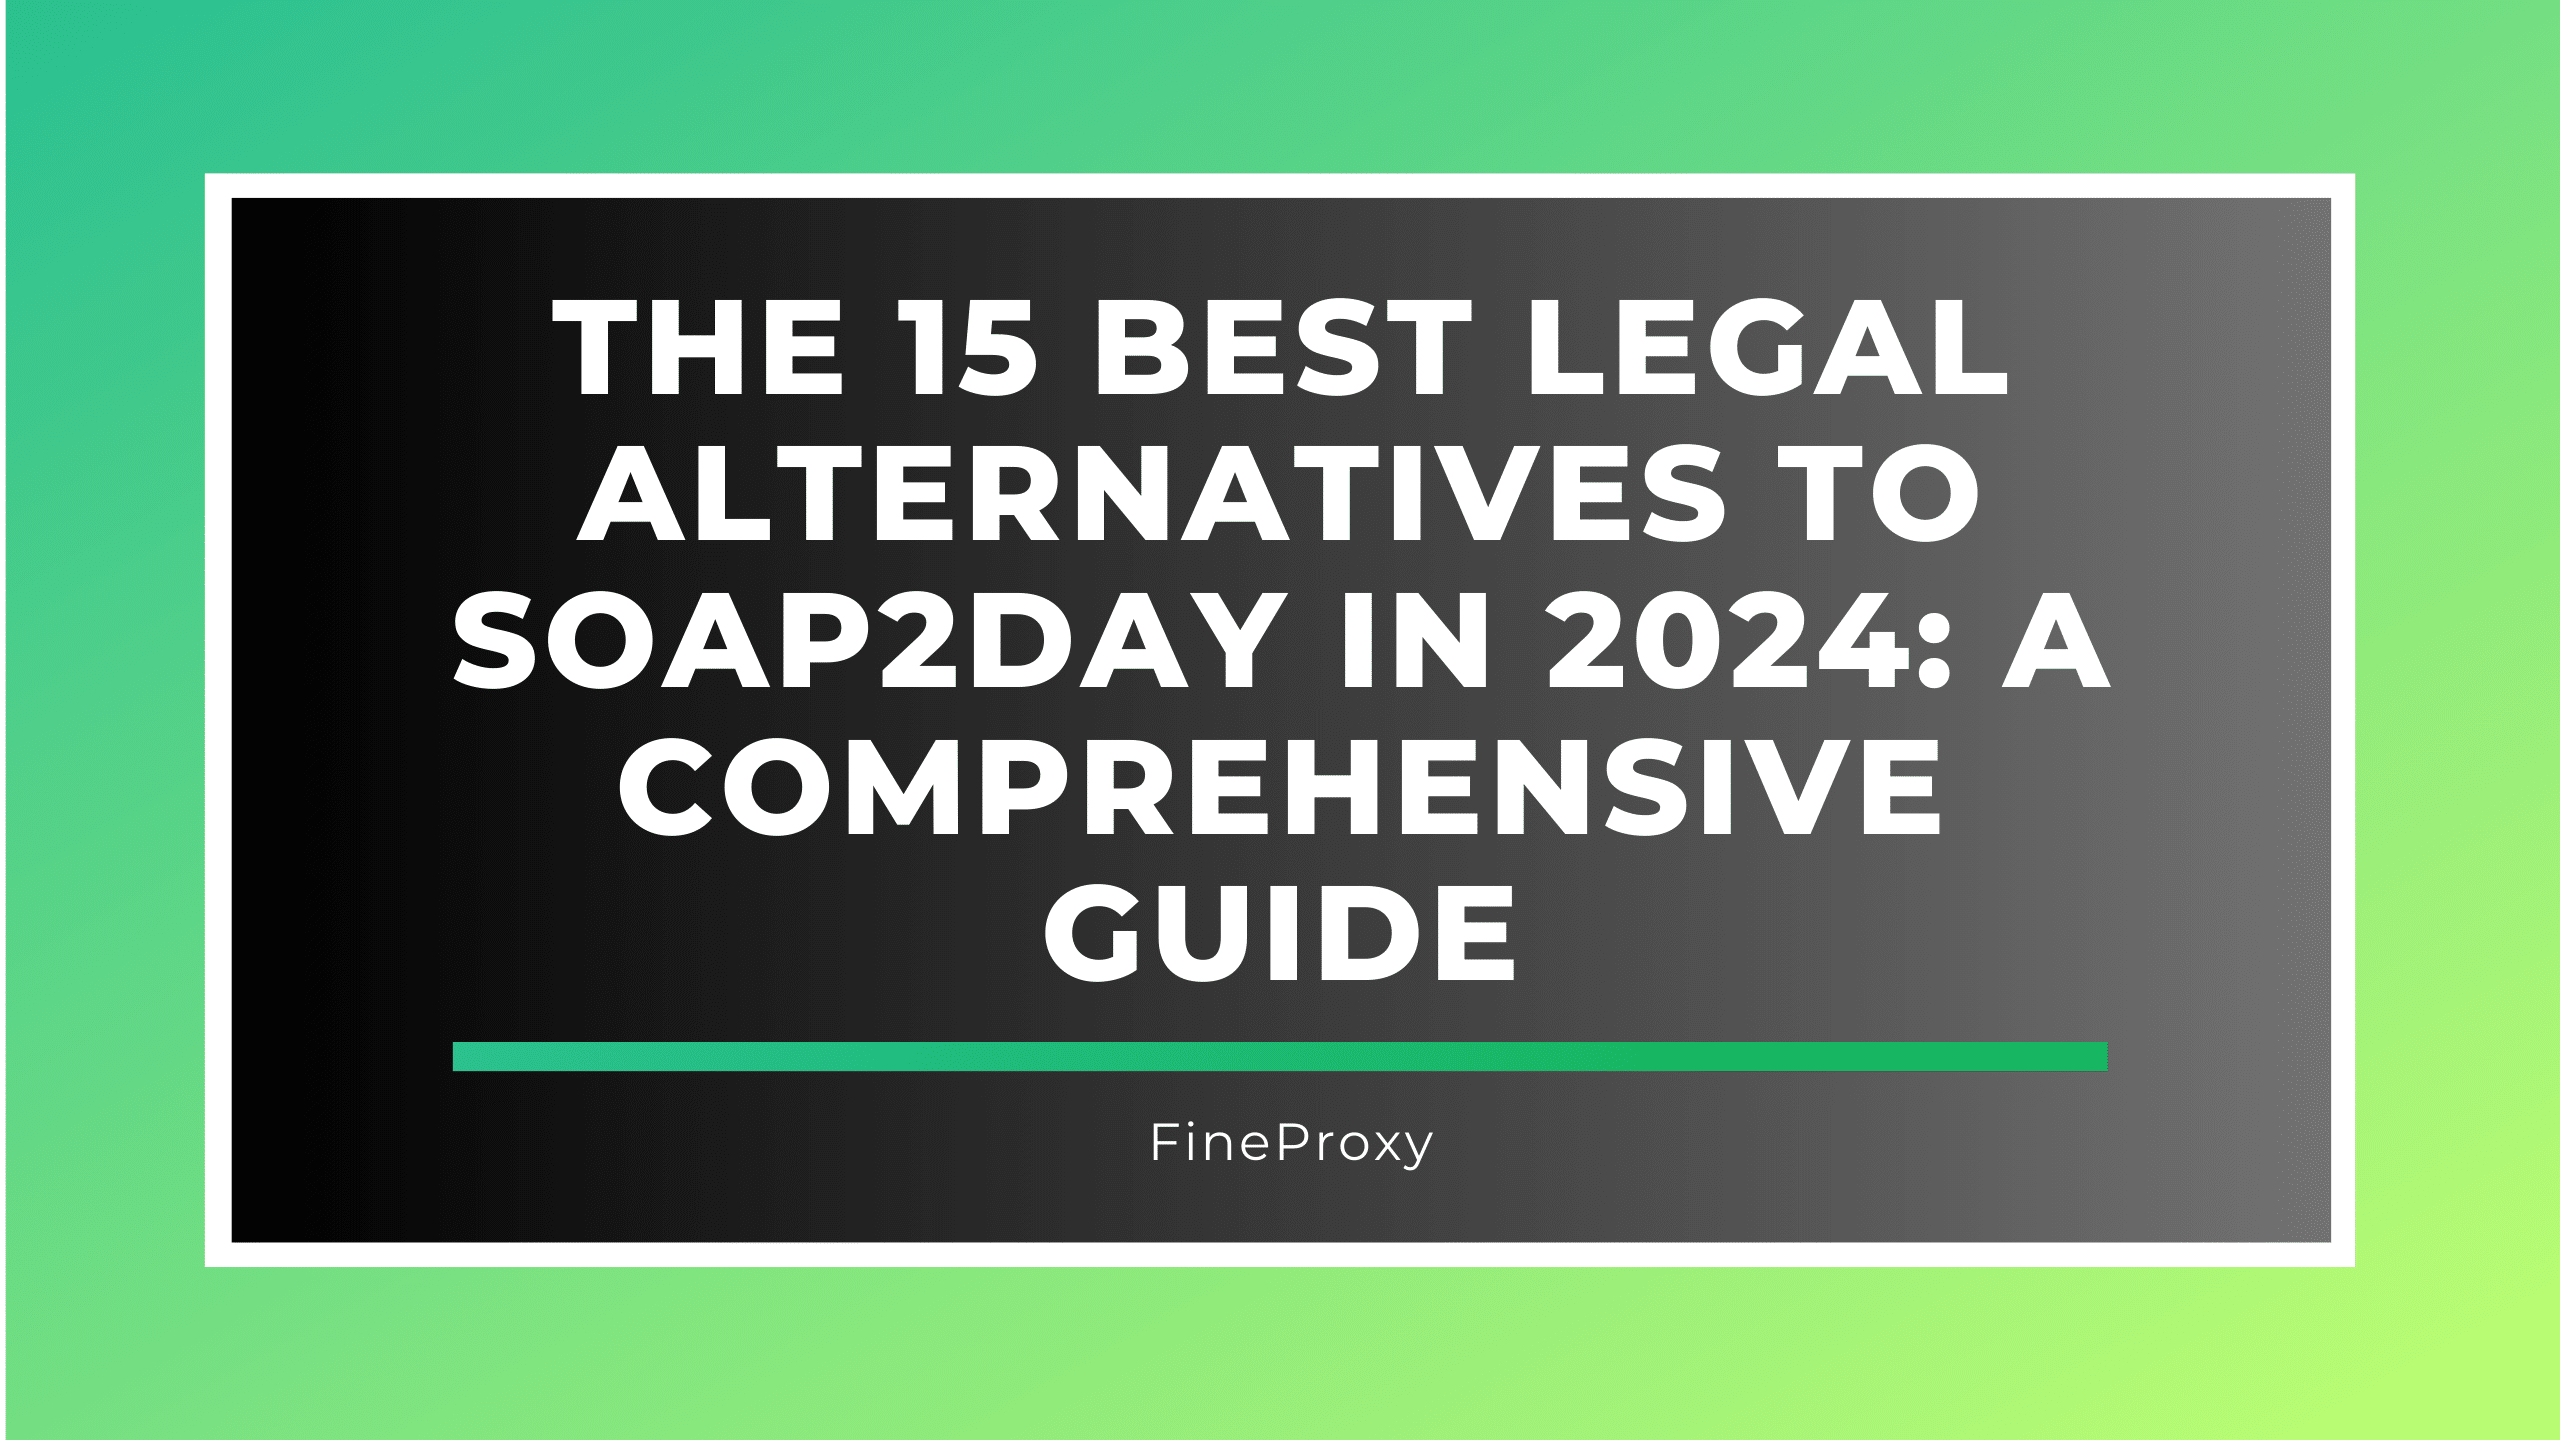 Discover the Top 15 Legal Alternatives to Soap2day in 2024 FineProxy